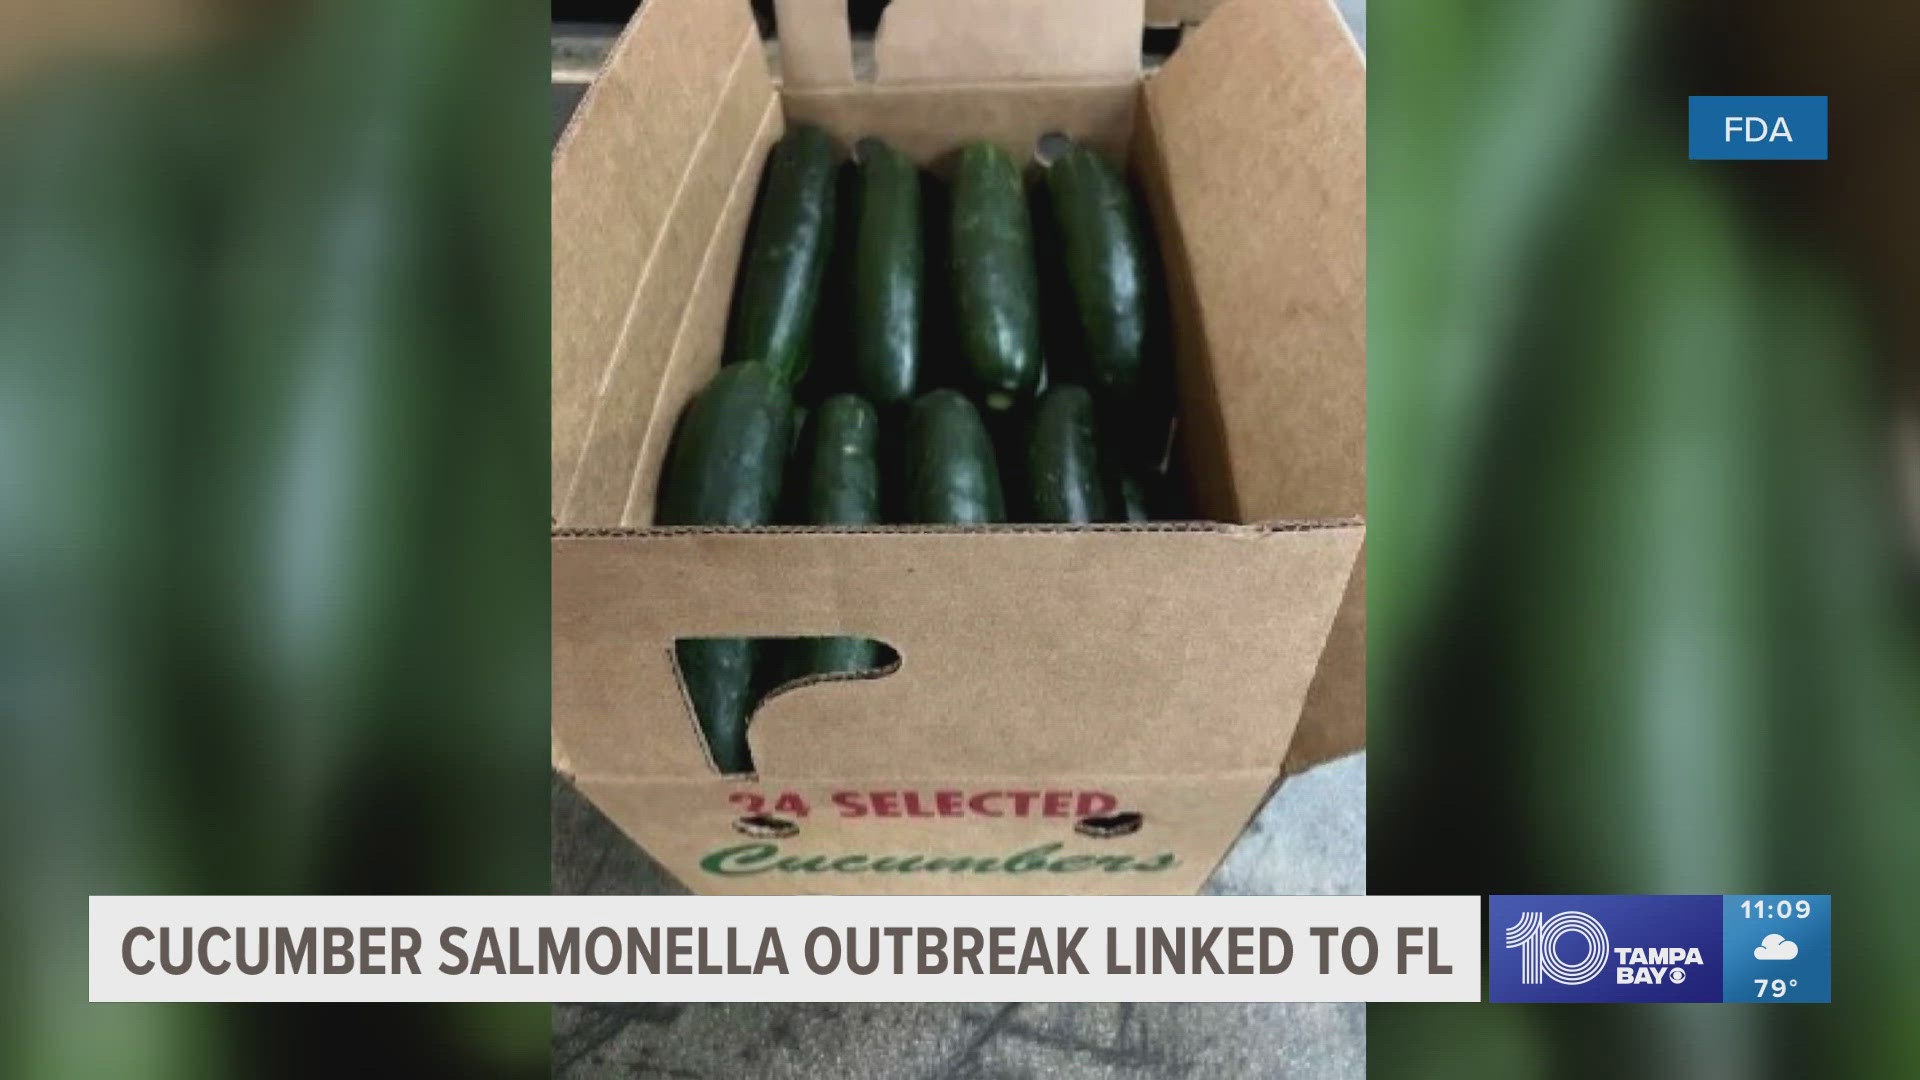 Investigators originally said there were two outbreaks of salmonella possibly tied to cucumbers, but combined them into one because of several similarities.